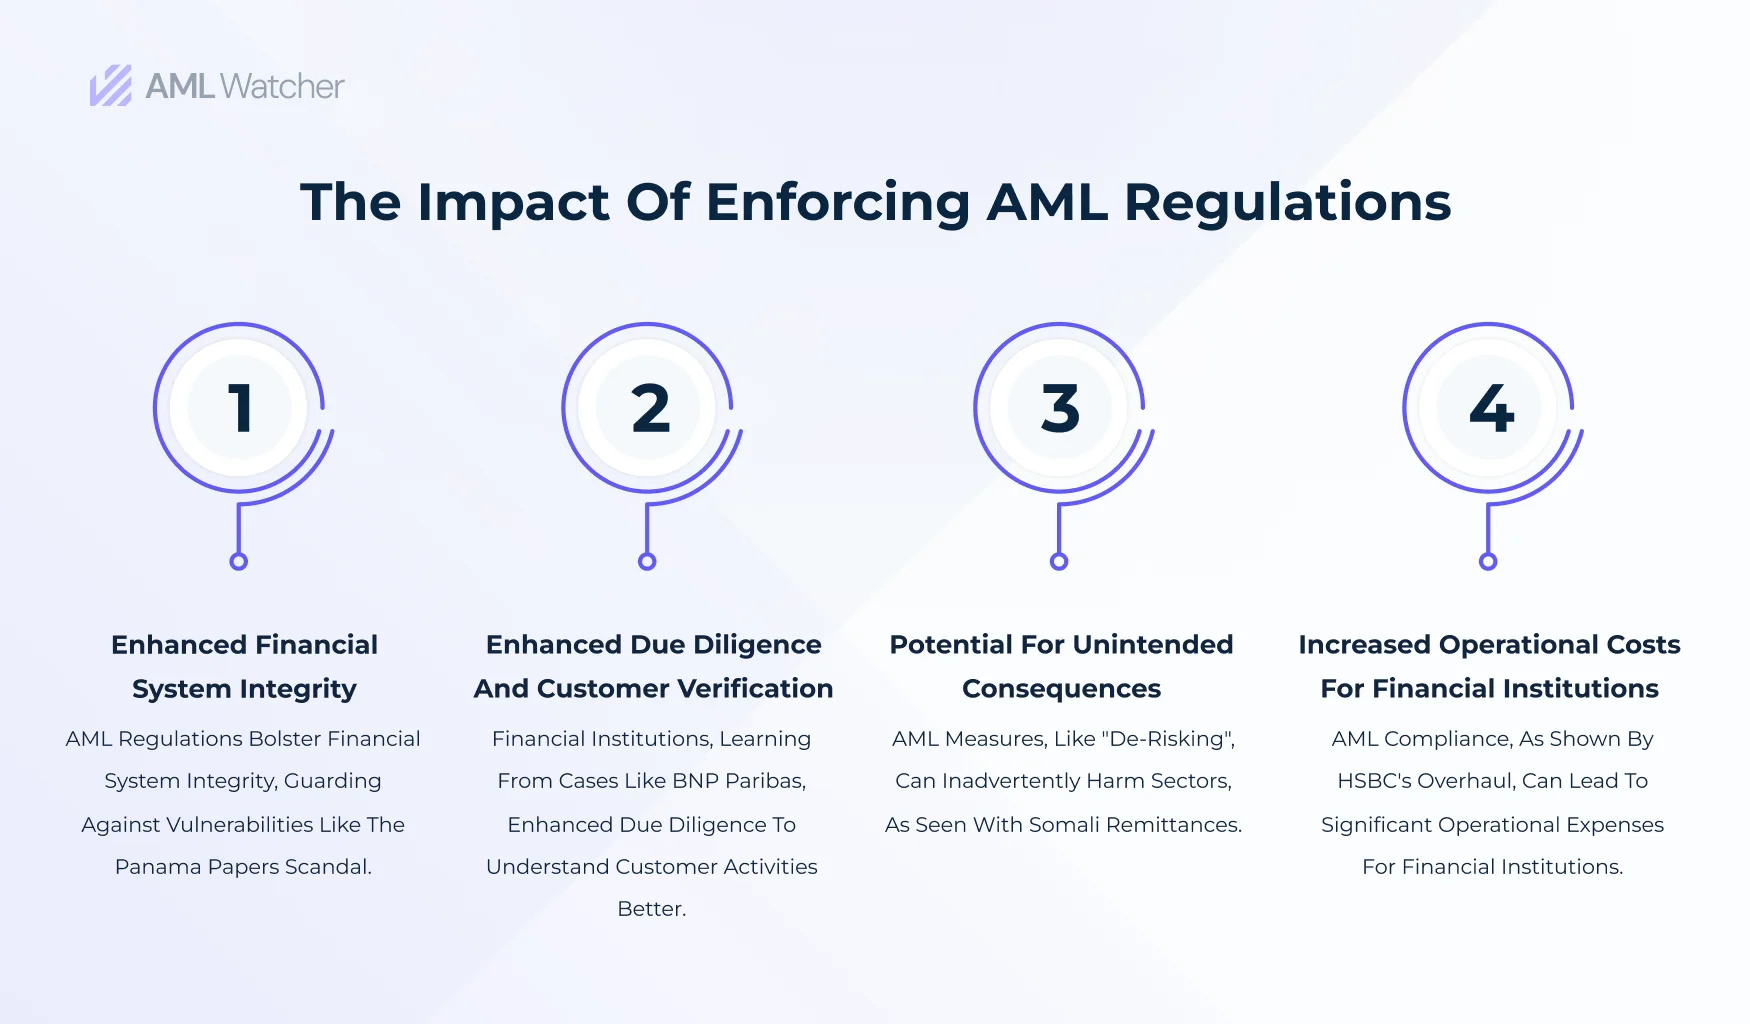 The Impact of Enforcing AML Regulations: